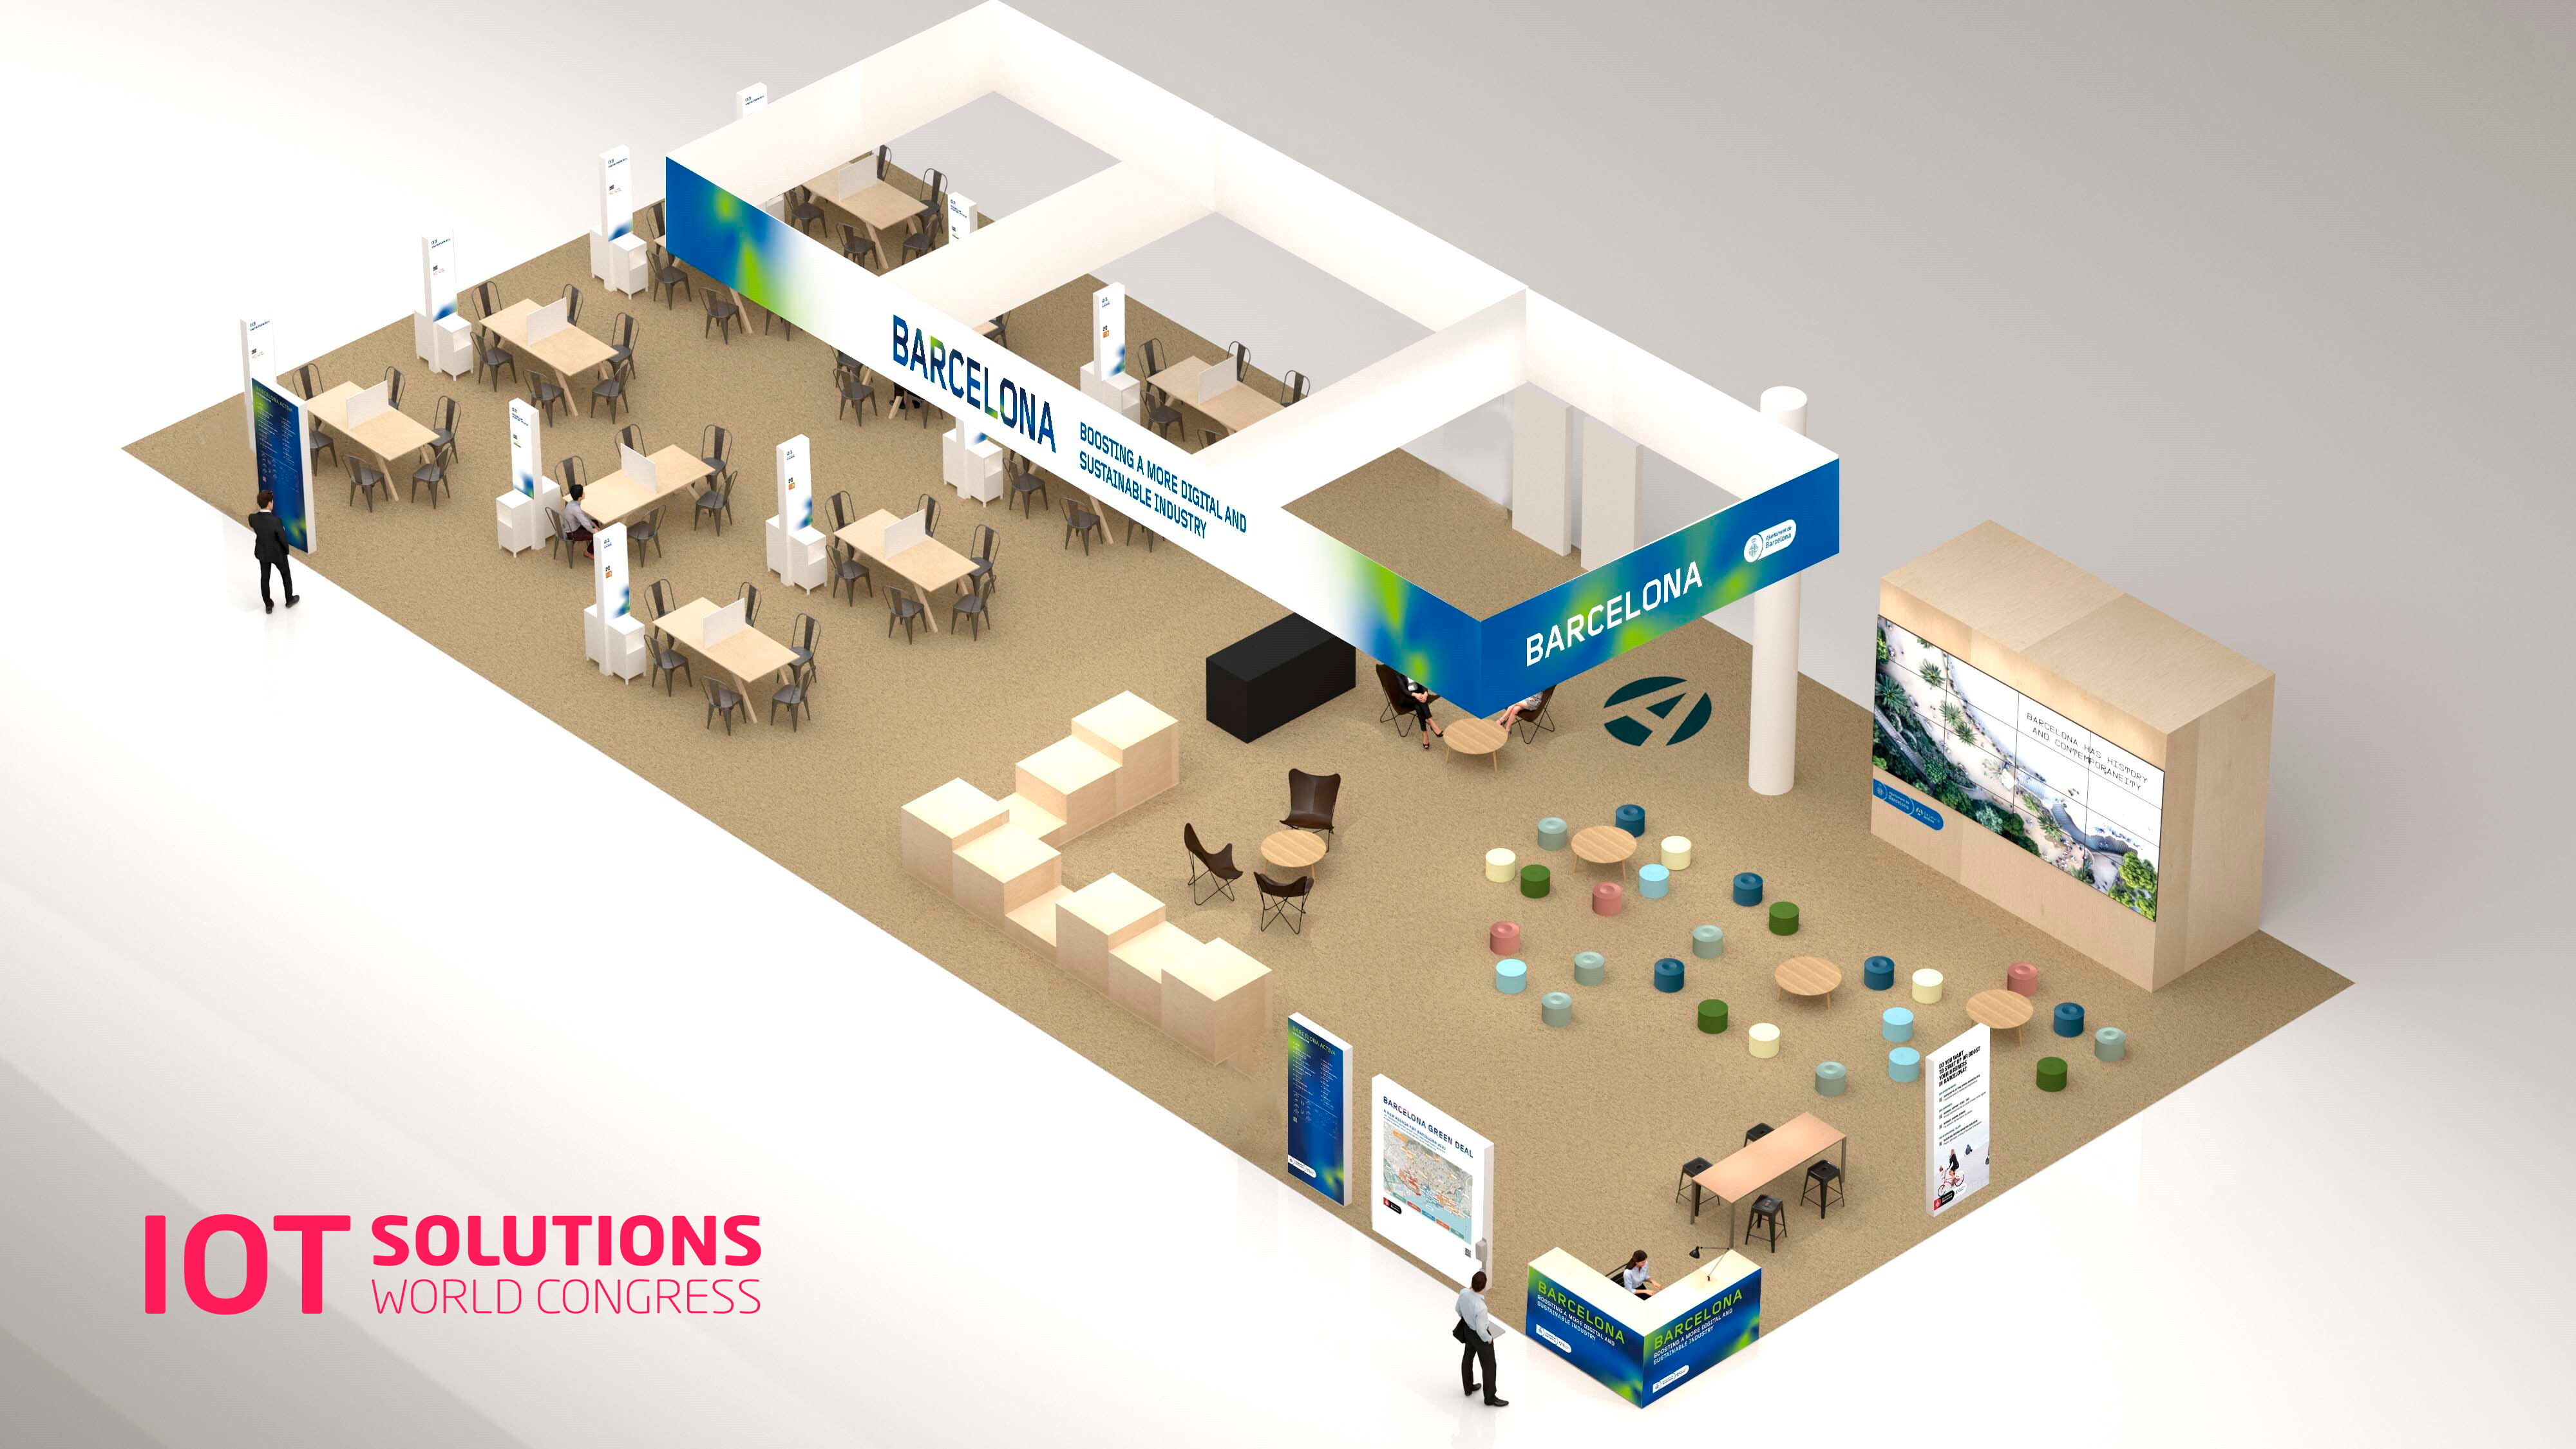 A sample of the stand where Barcelona Activa will participate in the IoT fair